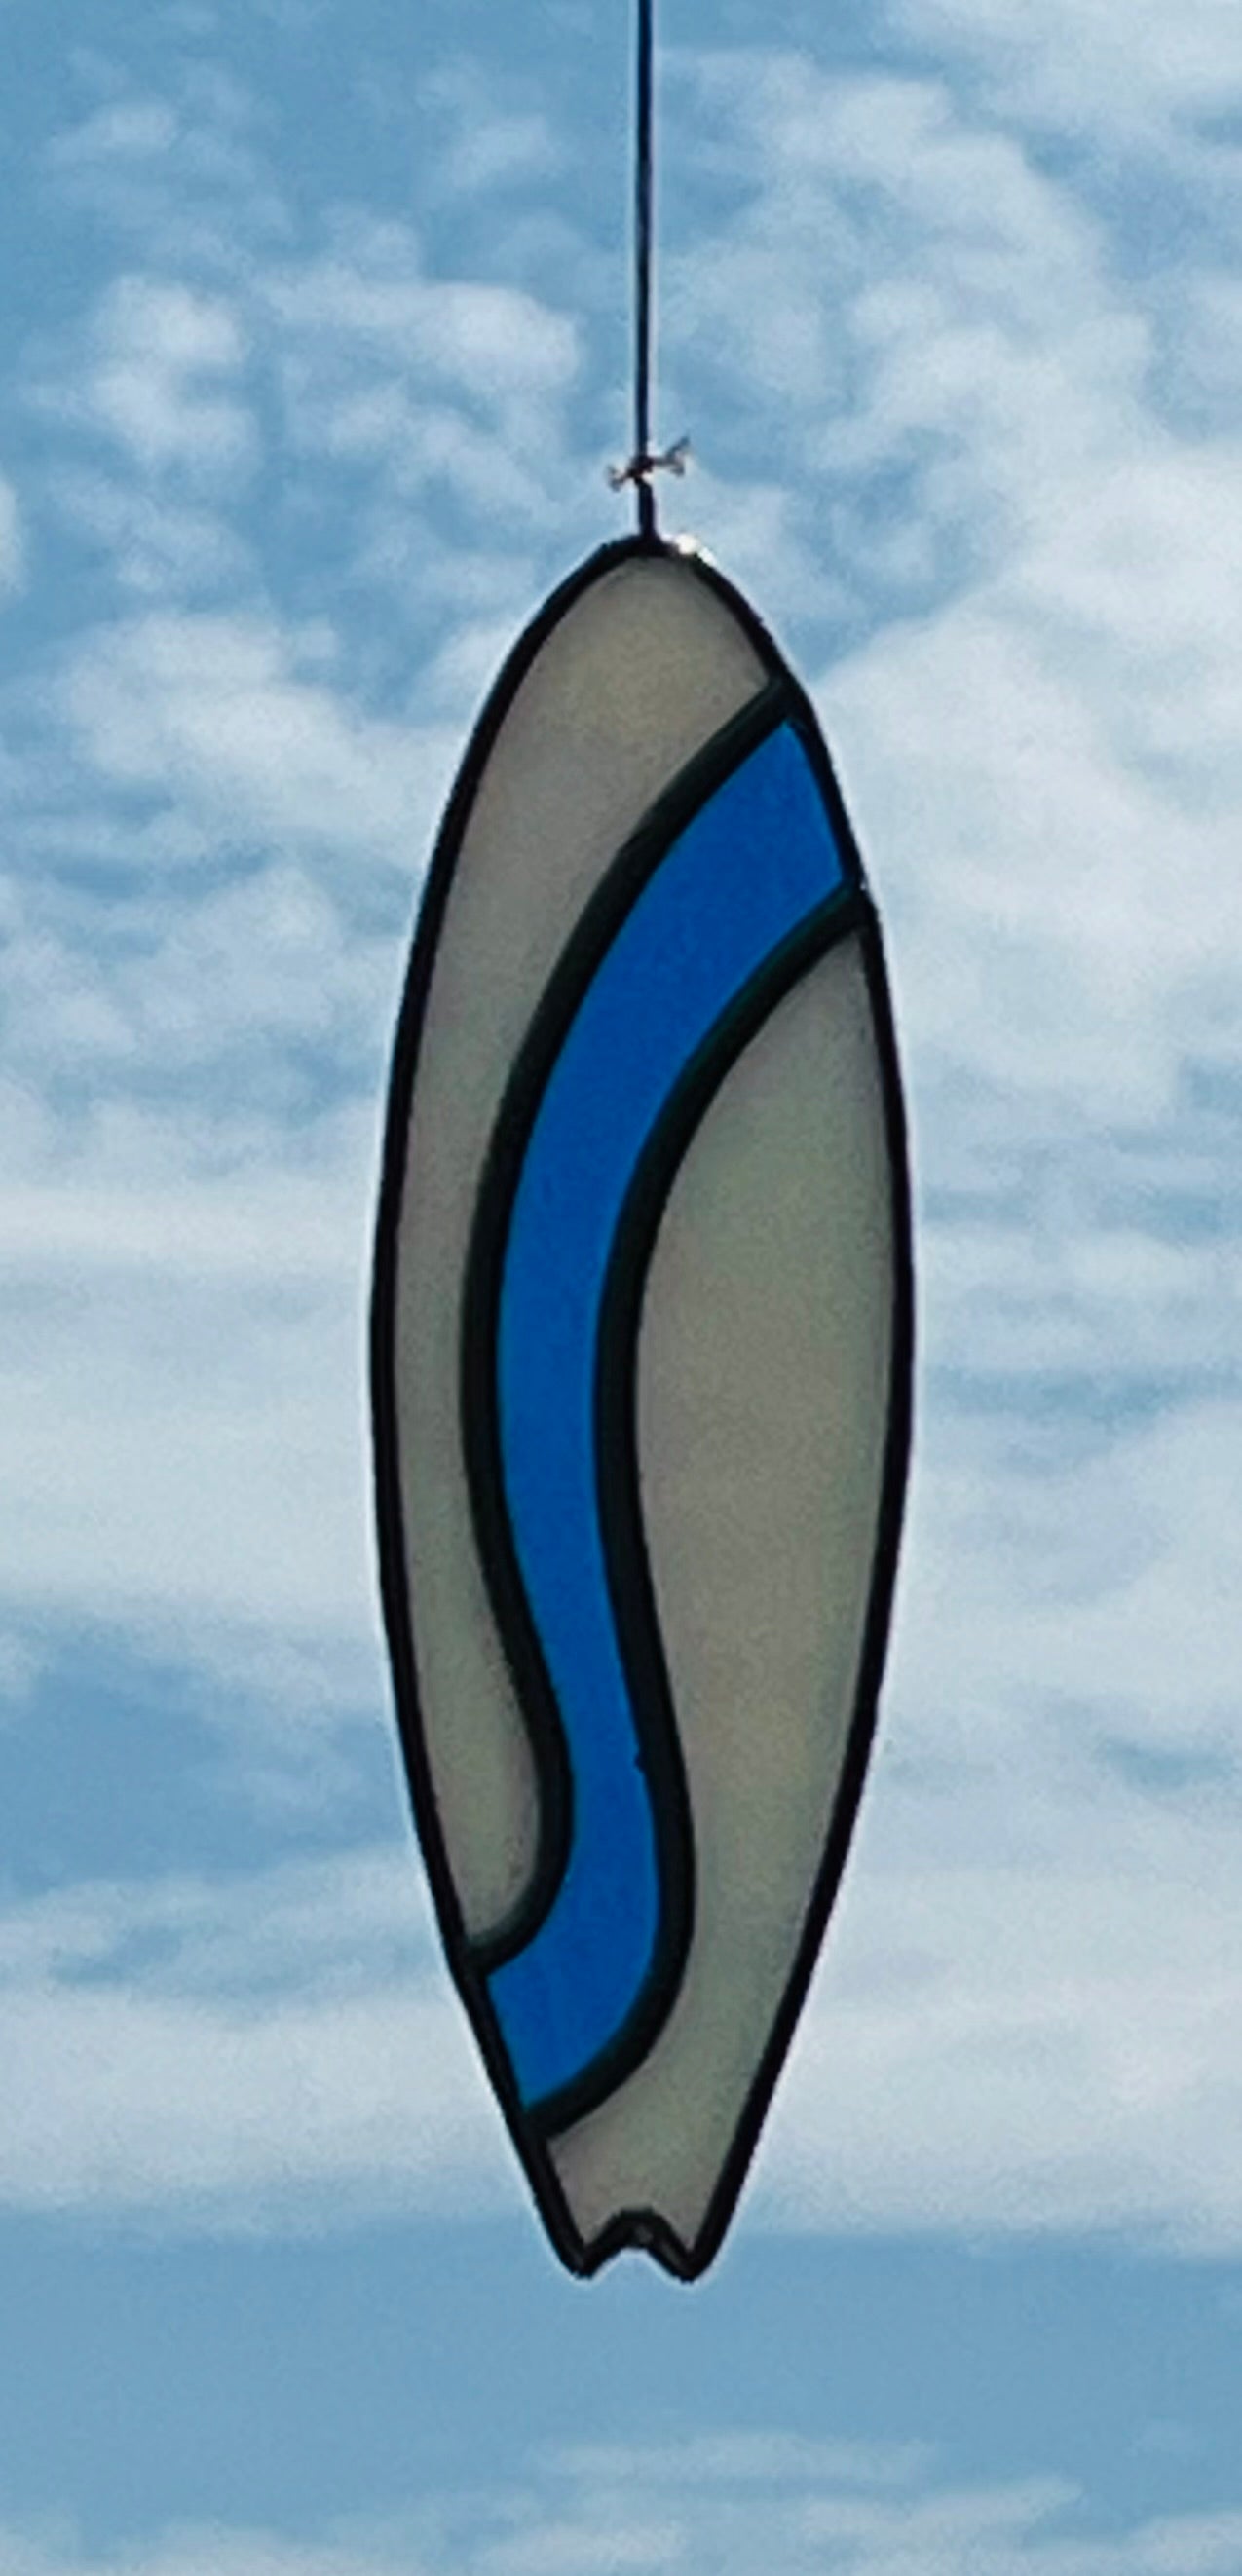 A stained glass shortboard that is made with white opalescent glass with a blue glass wave down the center. Hung with a blue sky background.